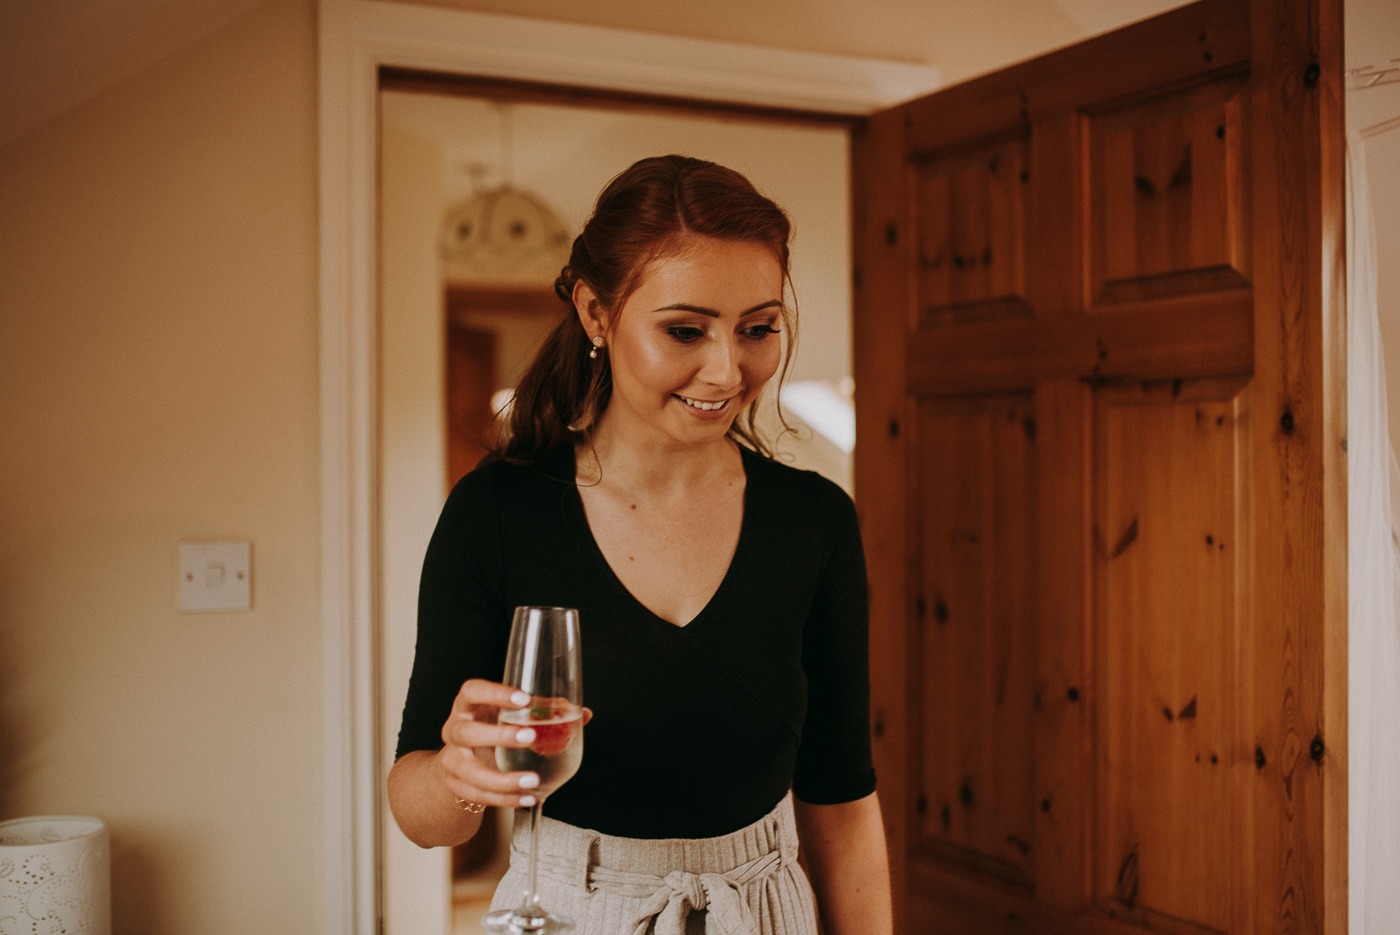 A person holding a glass of wine